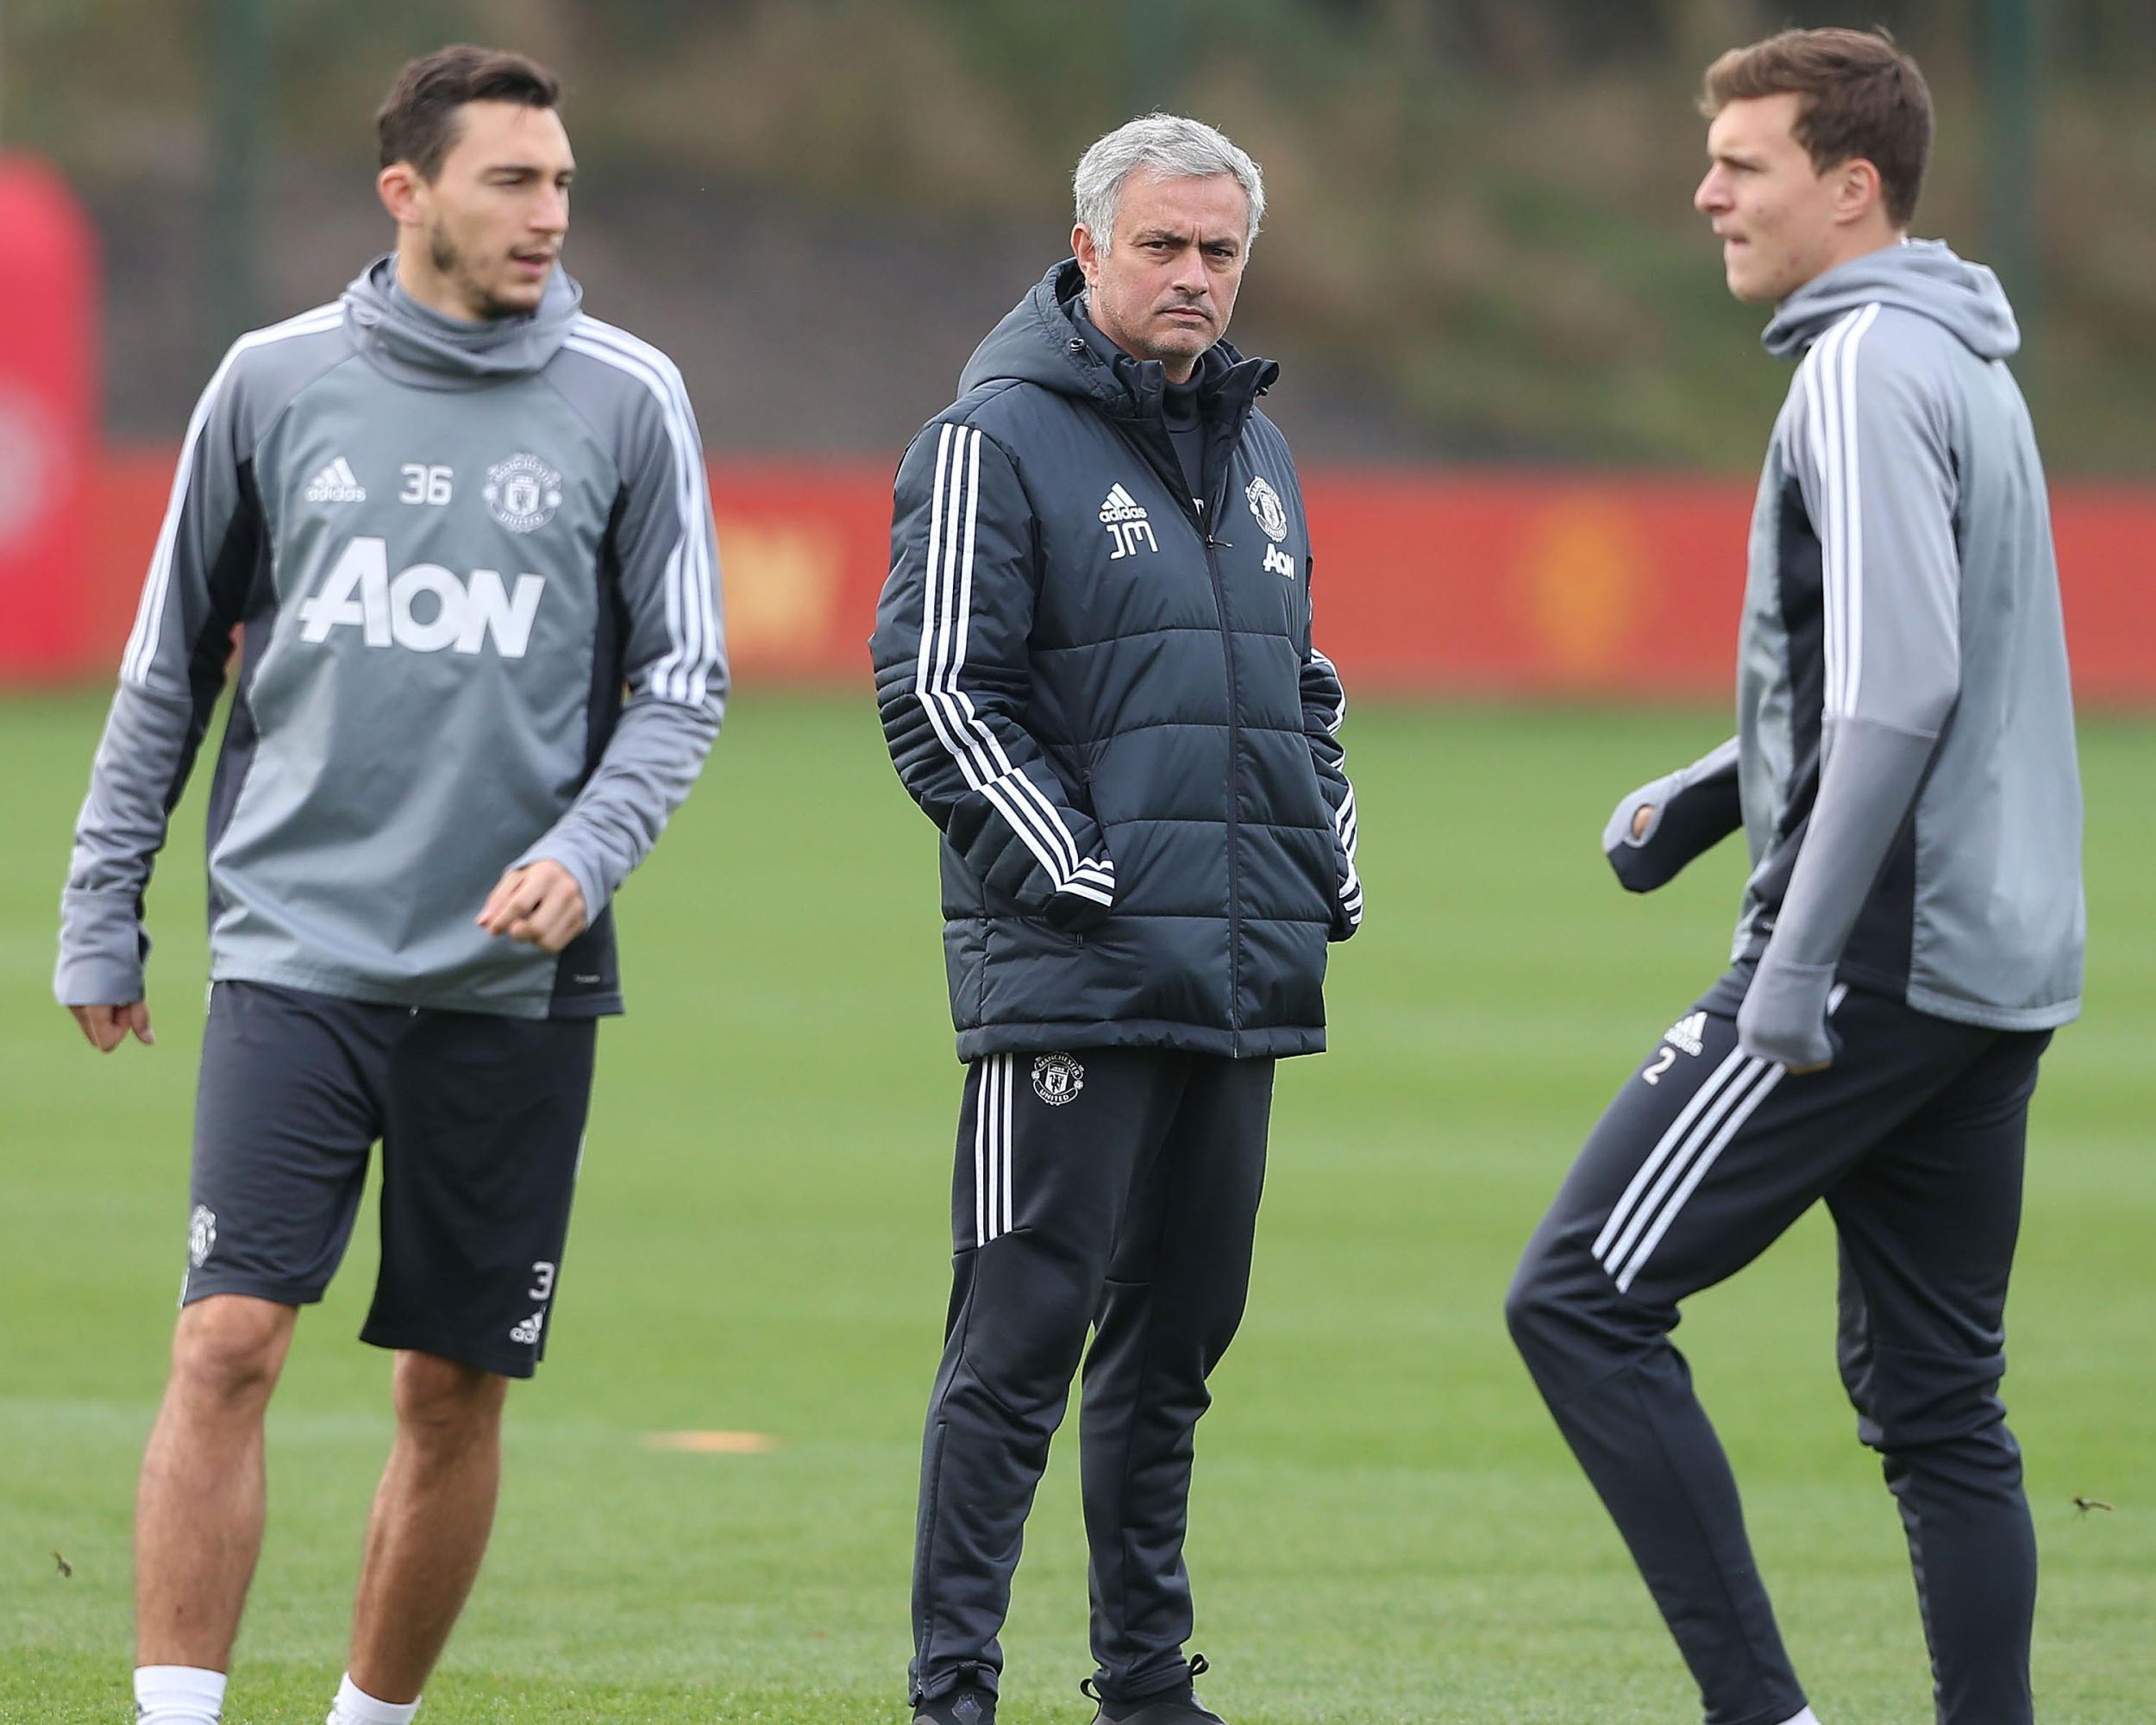 United's training plan will be altered before the game